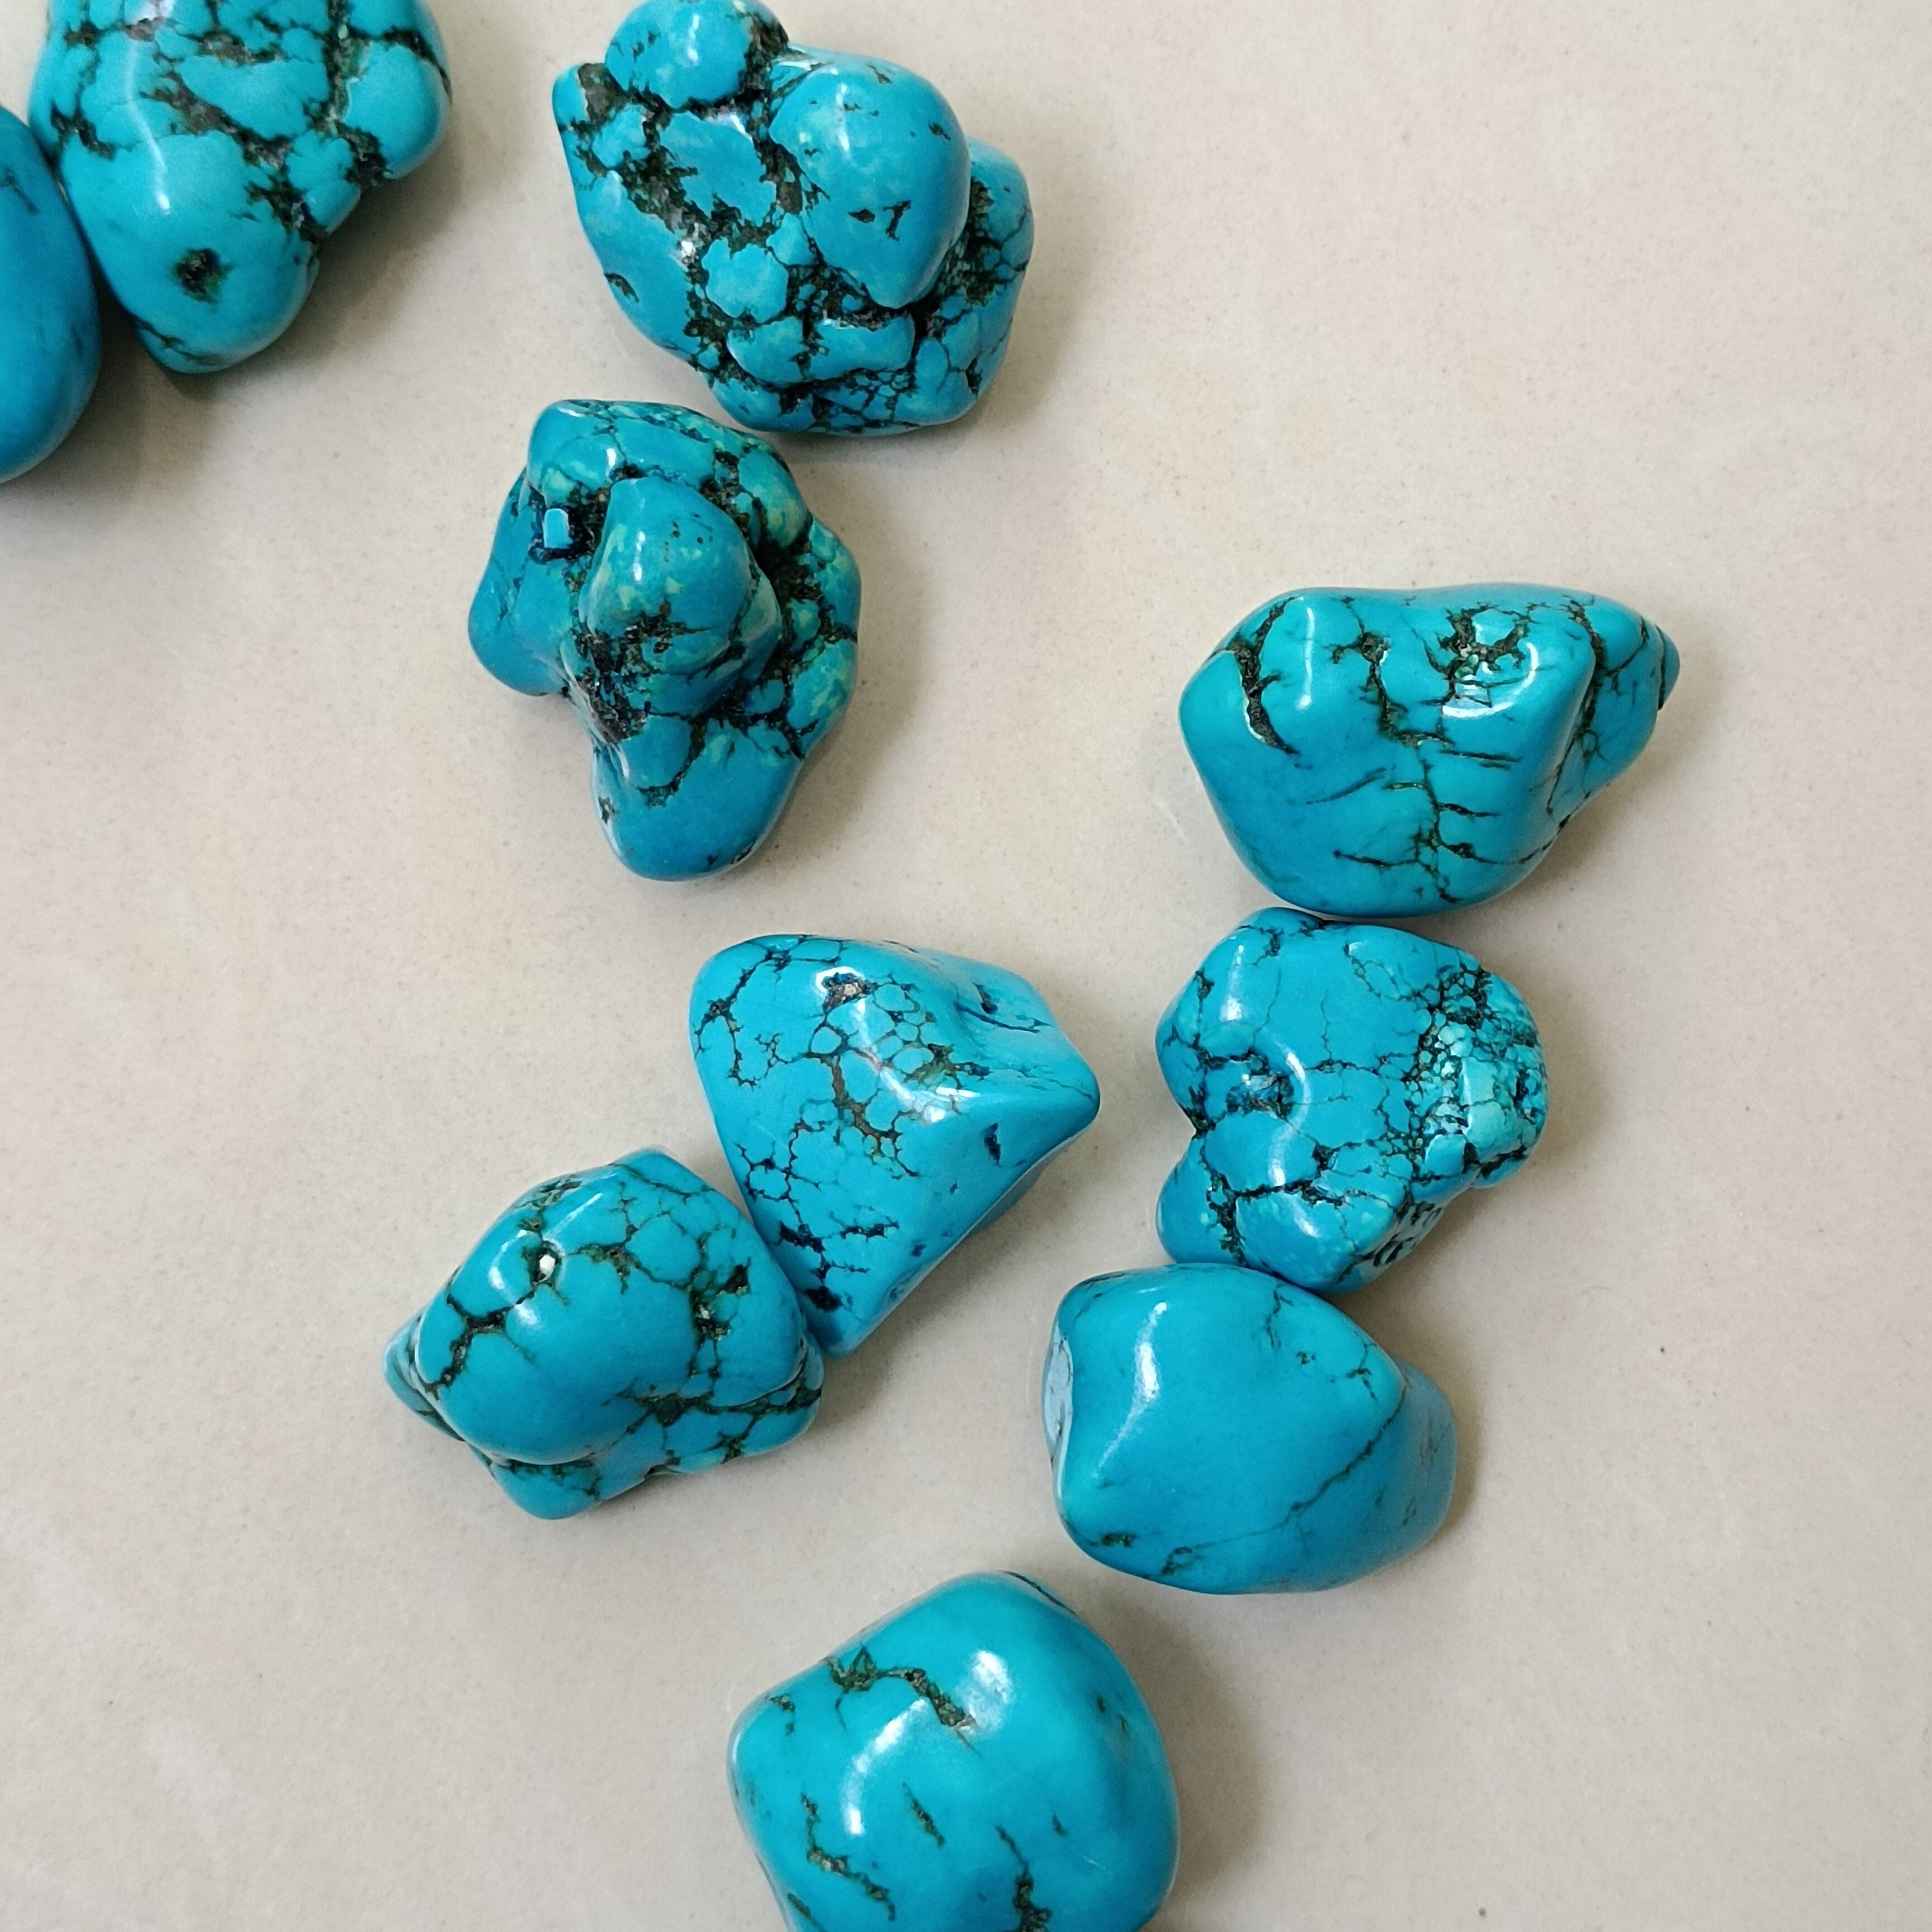 100g Natural particle Blue Turquoise